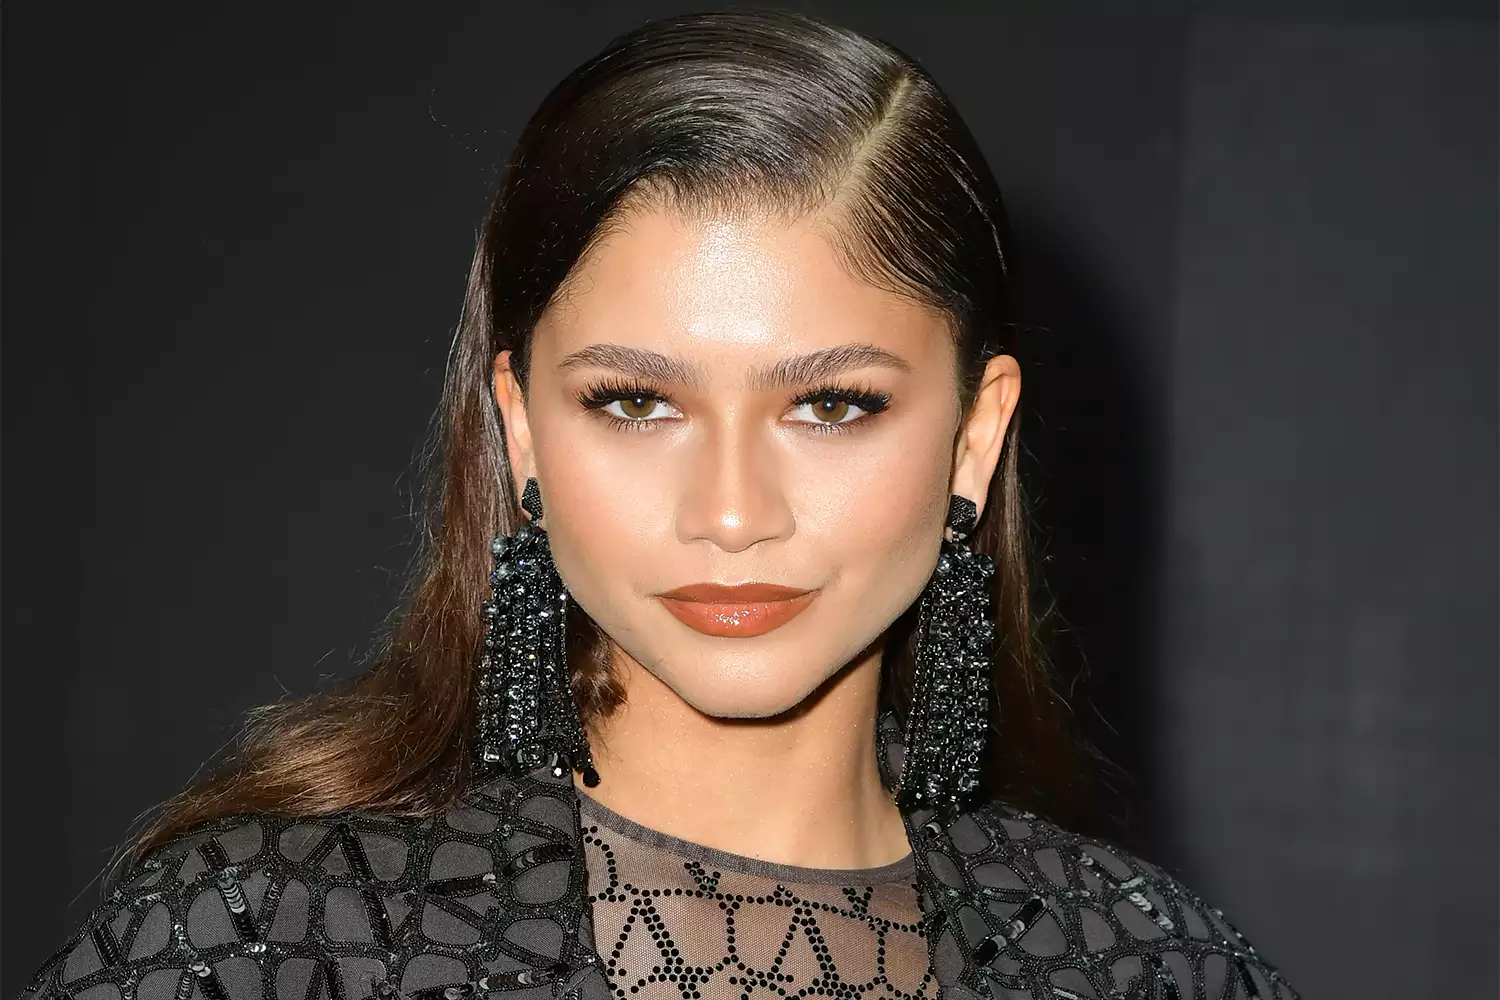 Zendaya Gave the Blueberry Milk Manicure Trend Her Stamp of Approval